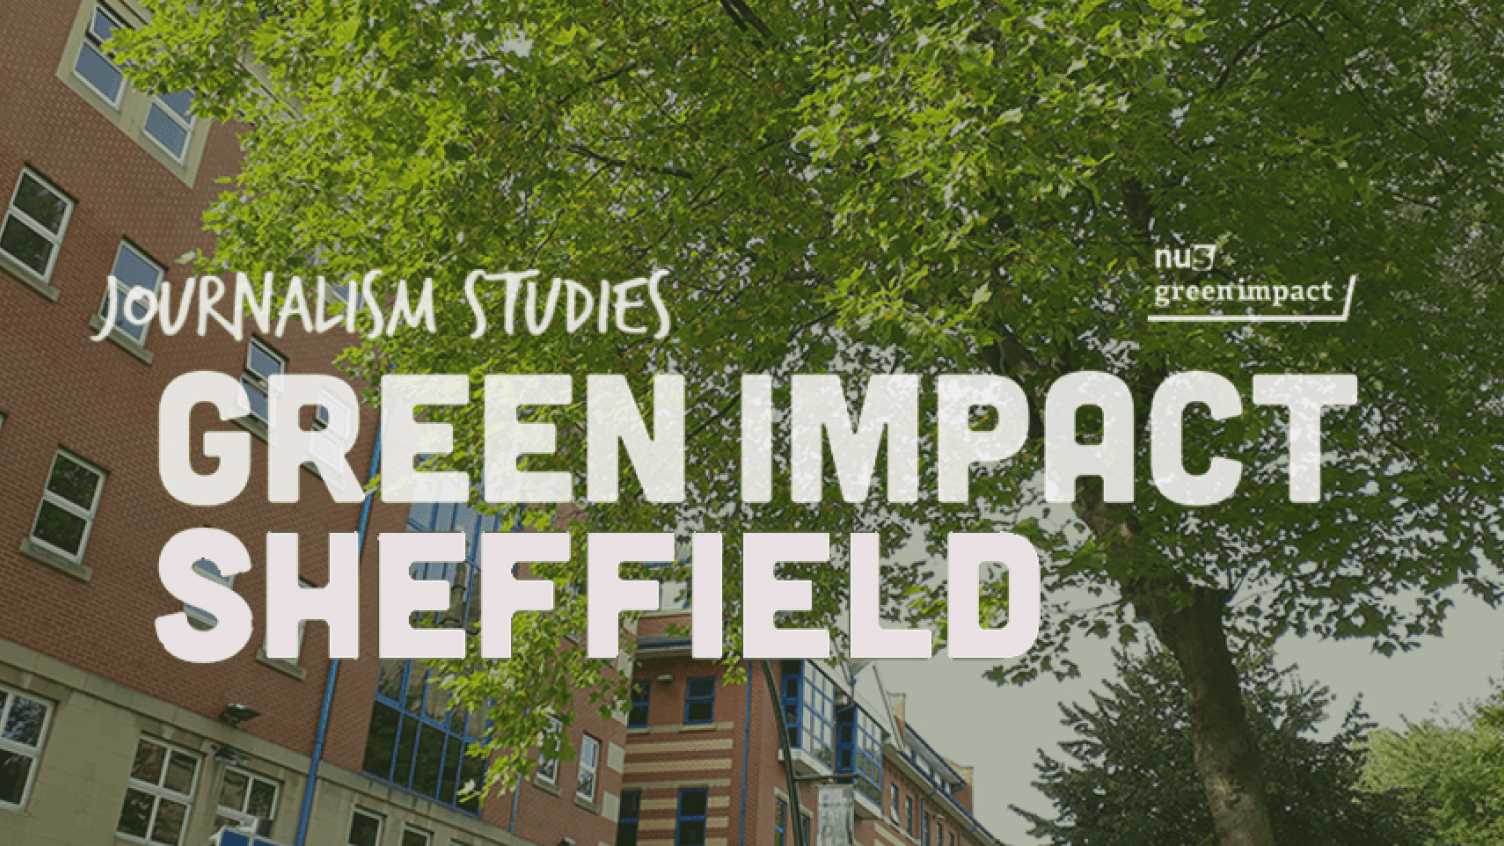 Thumbnail for Green Impact | Journalism, Media and Communication